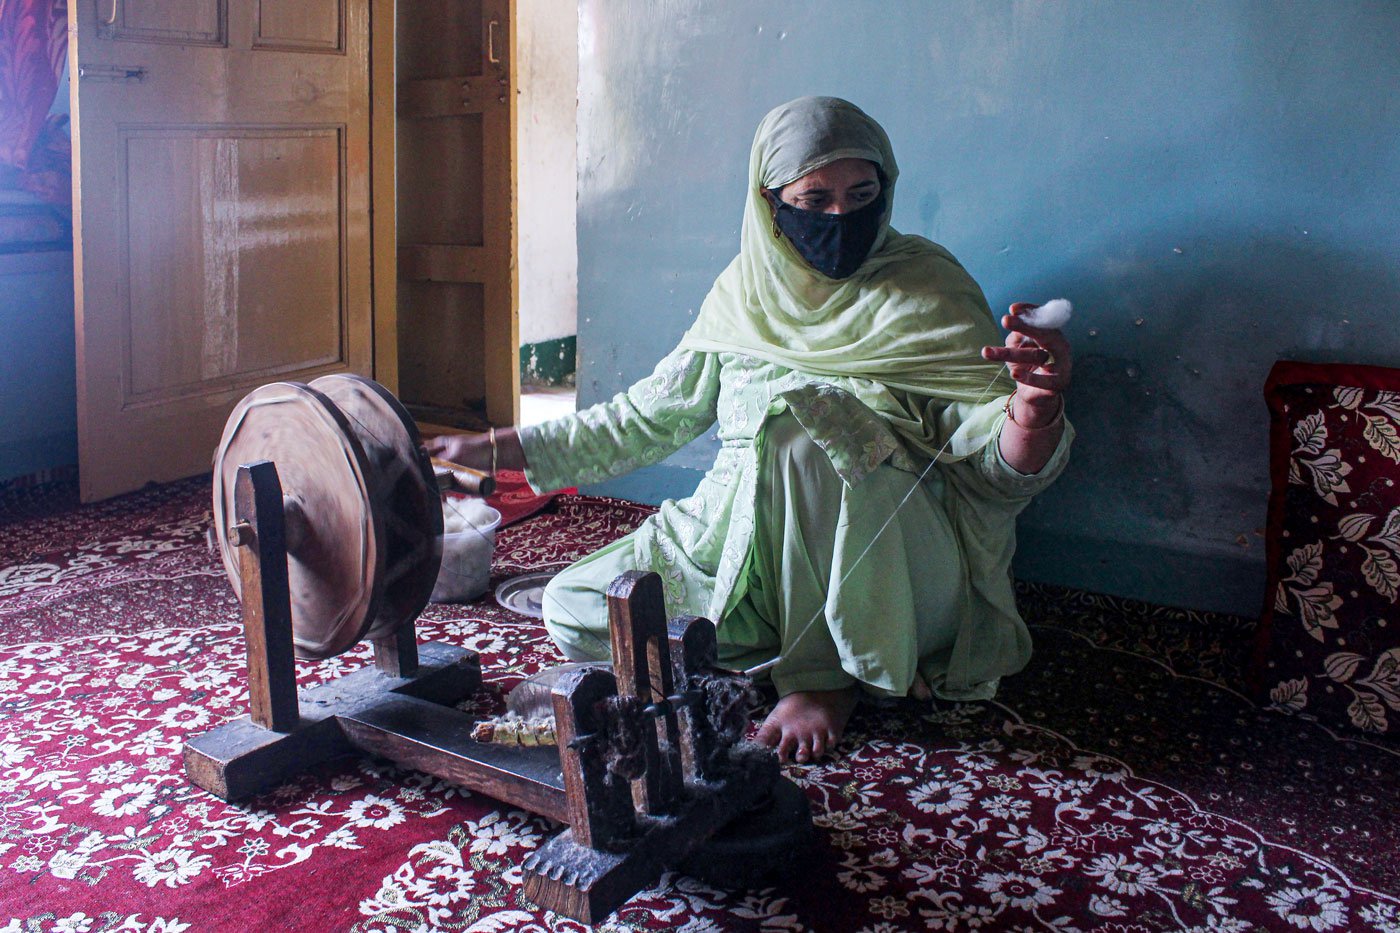 Fahmeeda Bano usually takes a month to spin enough thread for a regular-sized pashmina shawl